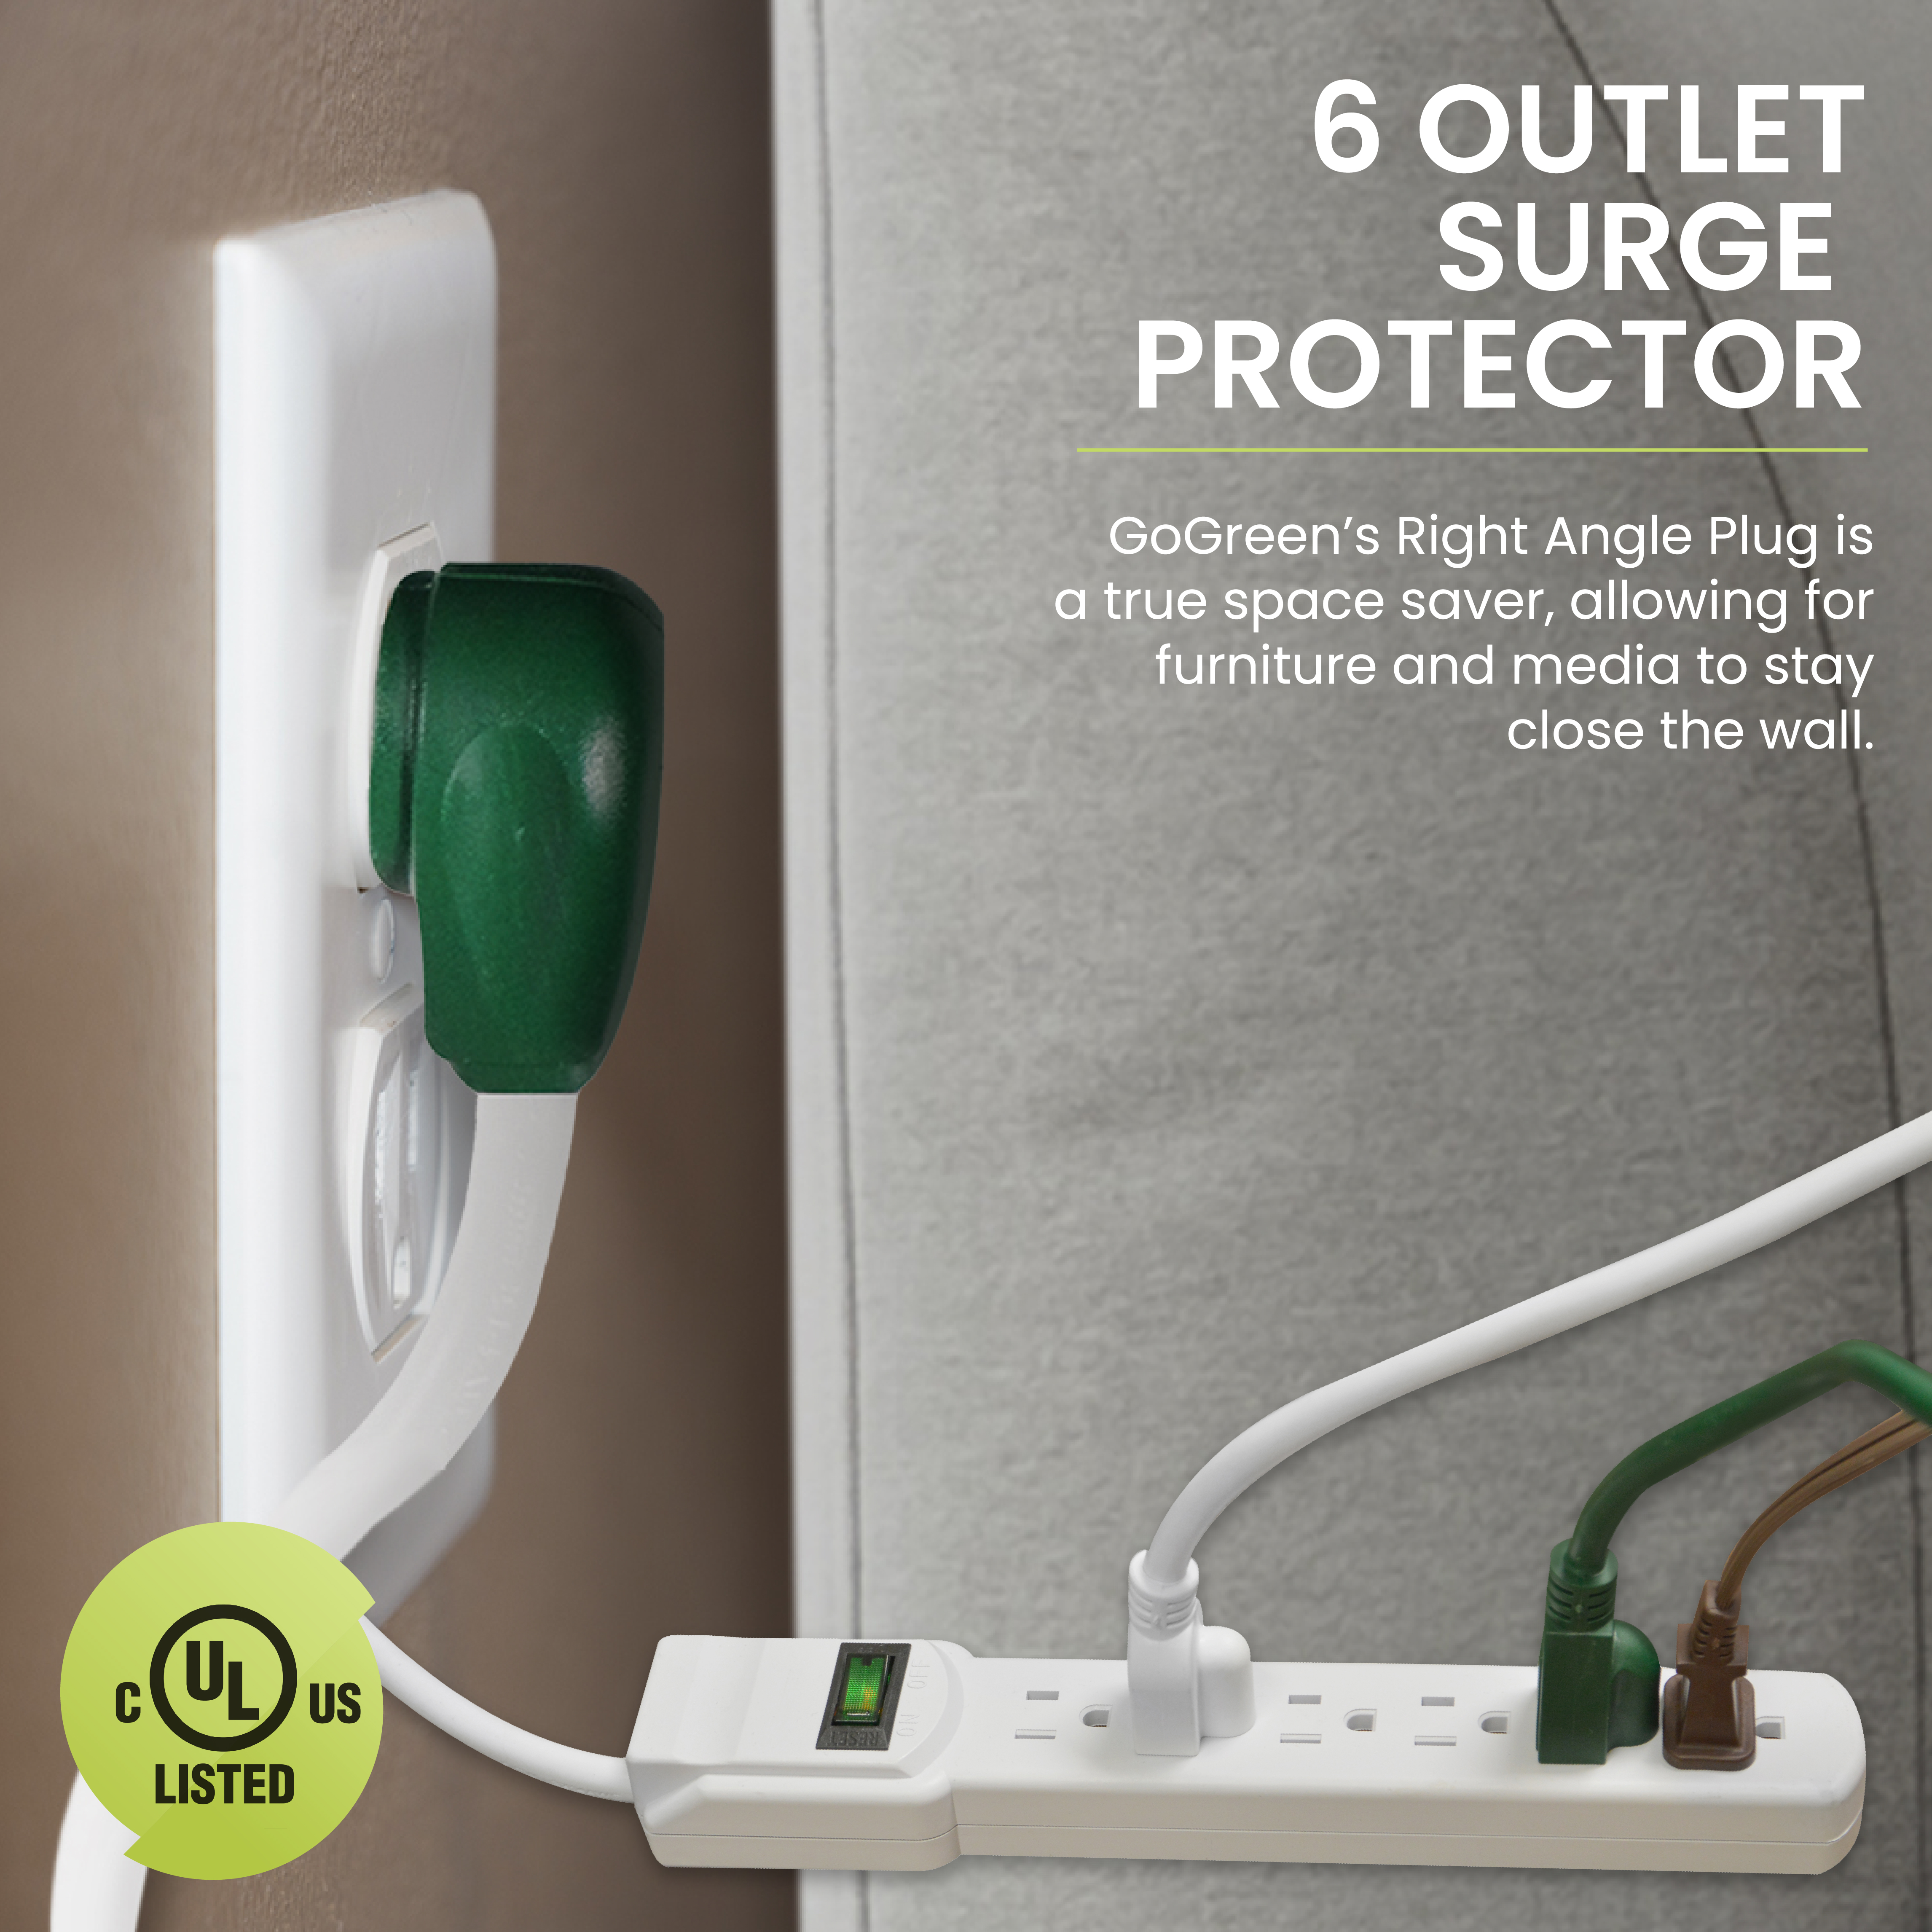 GoGreen Power GG-16103M-12 - 6 Outlet Surge Protector With 12ft Cord, White - image 5 of 8